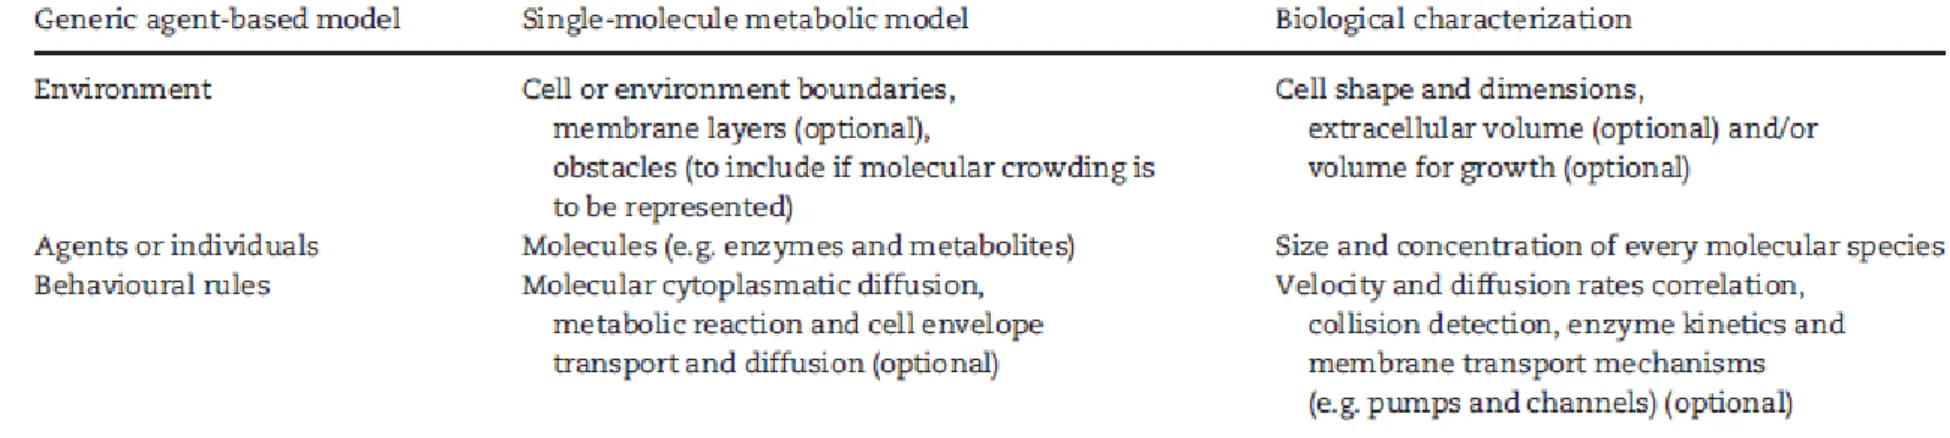 Table 1 . Essential components of a single-molecule metabolic model. A parallelism between the generic composition of an agent- agent-based  model  and  the  biological  information  to  be  incorporated  in  a  single-molecule  model  is  established